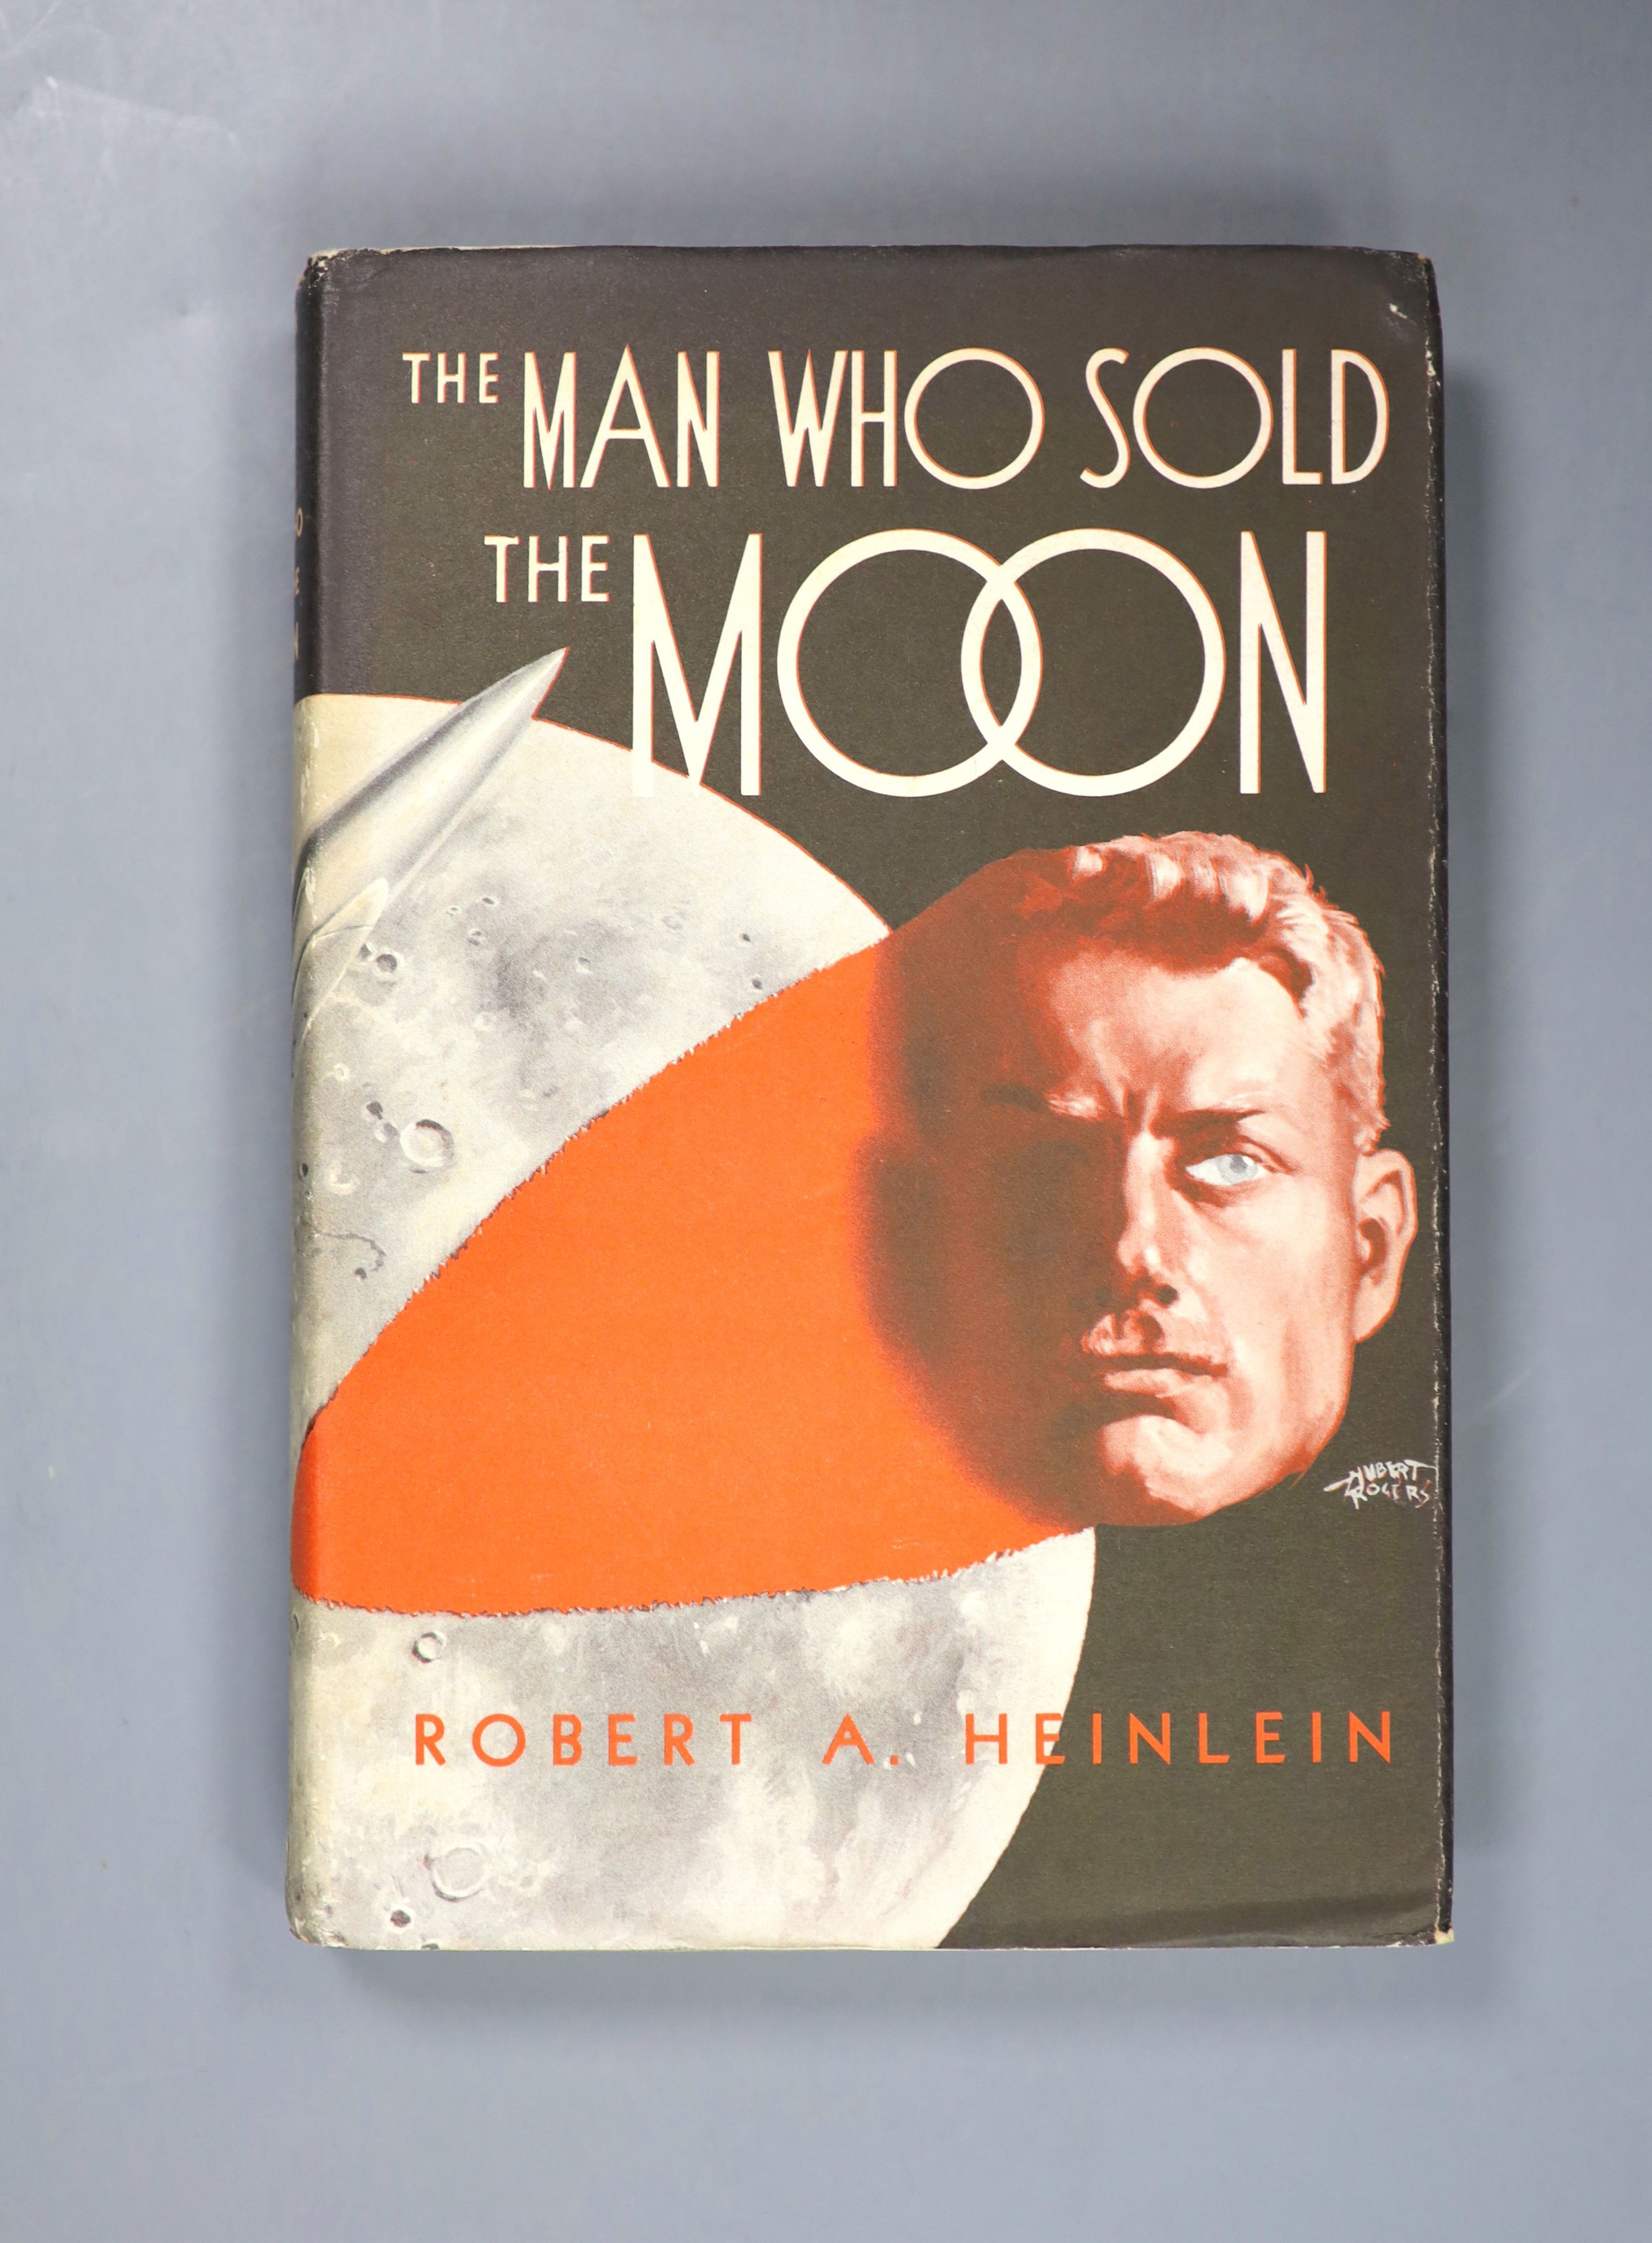 Heinlein, Robert A - Six works - Beyond This Horizon, 1st edition, with unclipped d/j, Fantasy Press, 1949; The Man Who Sold the Moon, 1st edition, with unclipped d/j, Shasta, Chicago, 1950; The Green Hills of Earth, 1st